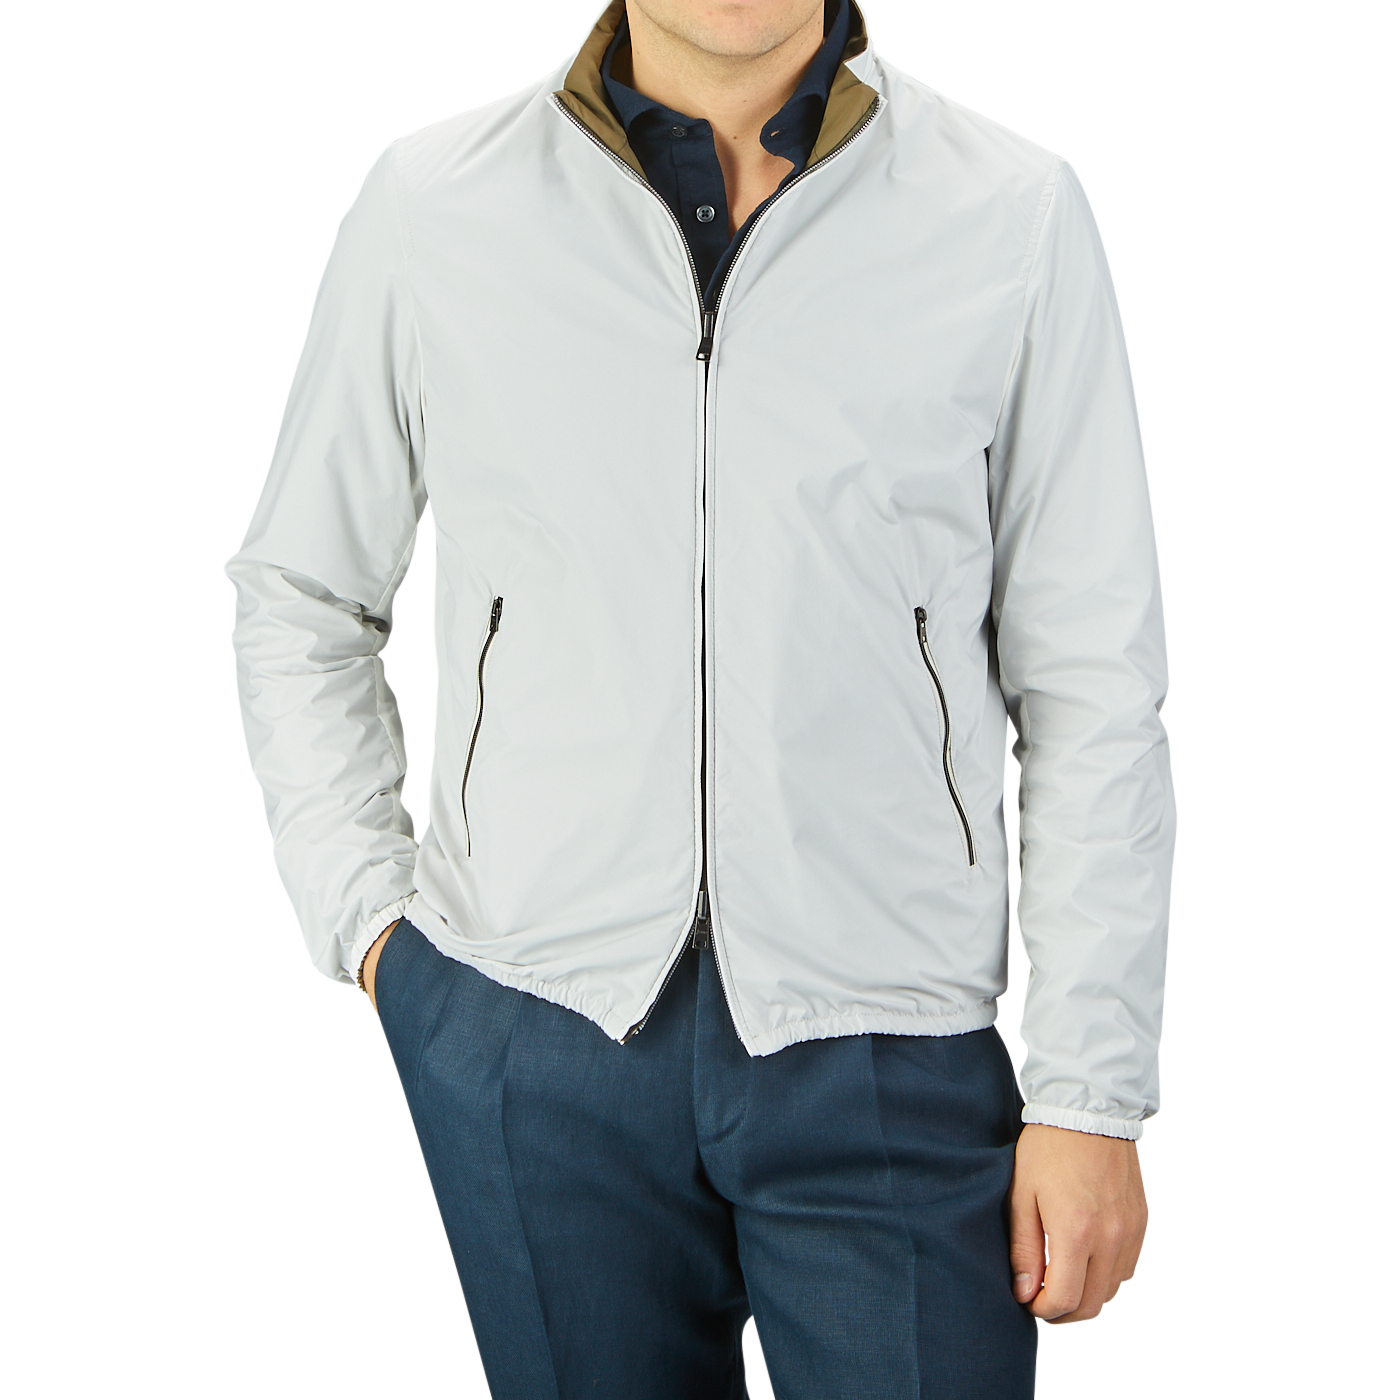 A person wearing a light gray, slim-fit zip-up jacket and dark blue pants is standing with hands in pockets. The Herno Olive Green White Reversible Nylon Blouson, made of water-resistant nylon, features black zipper accents and a slightly raised collar.